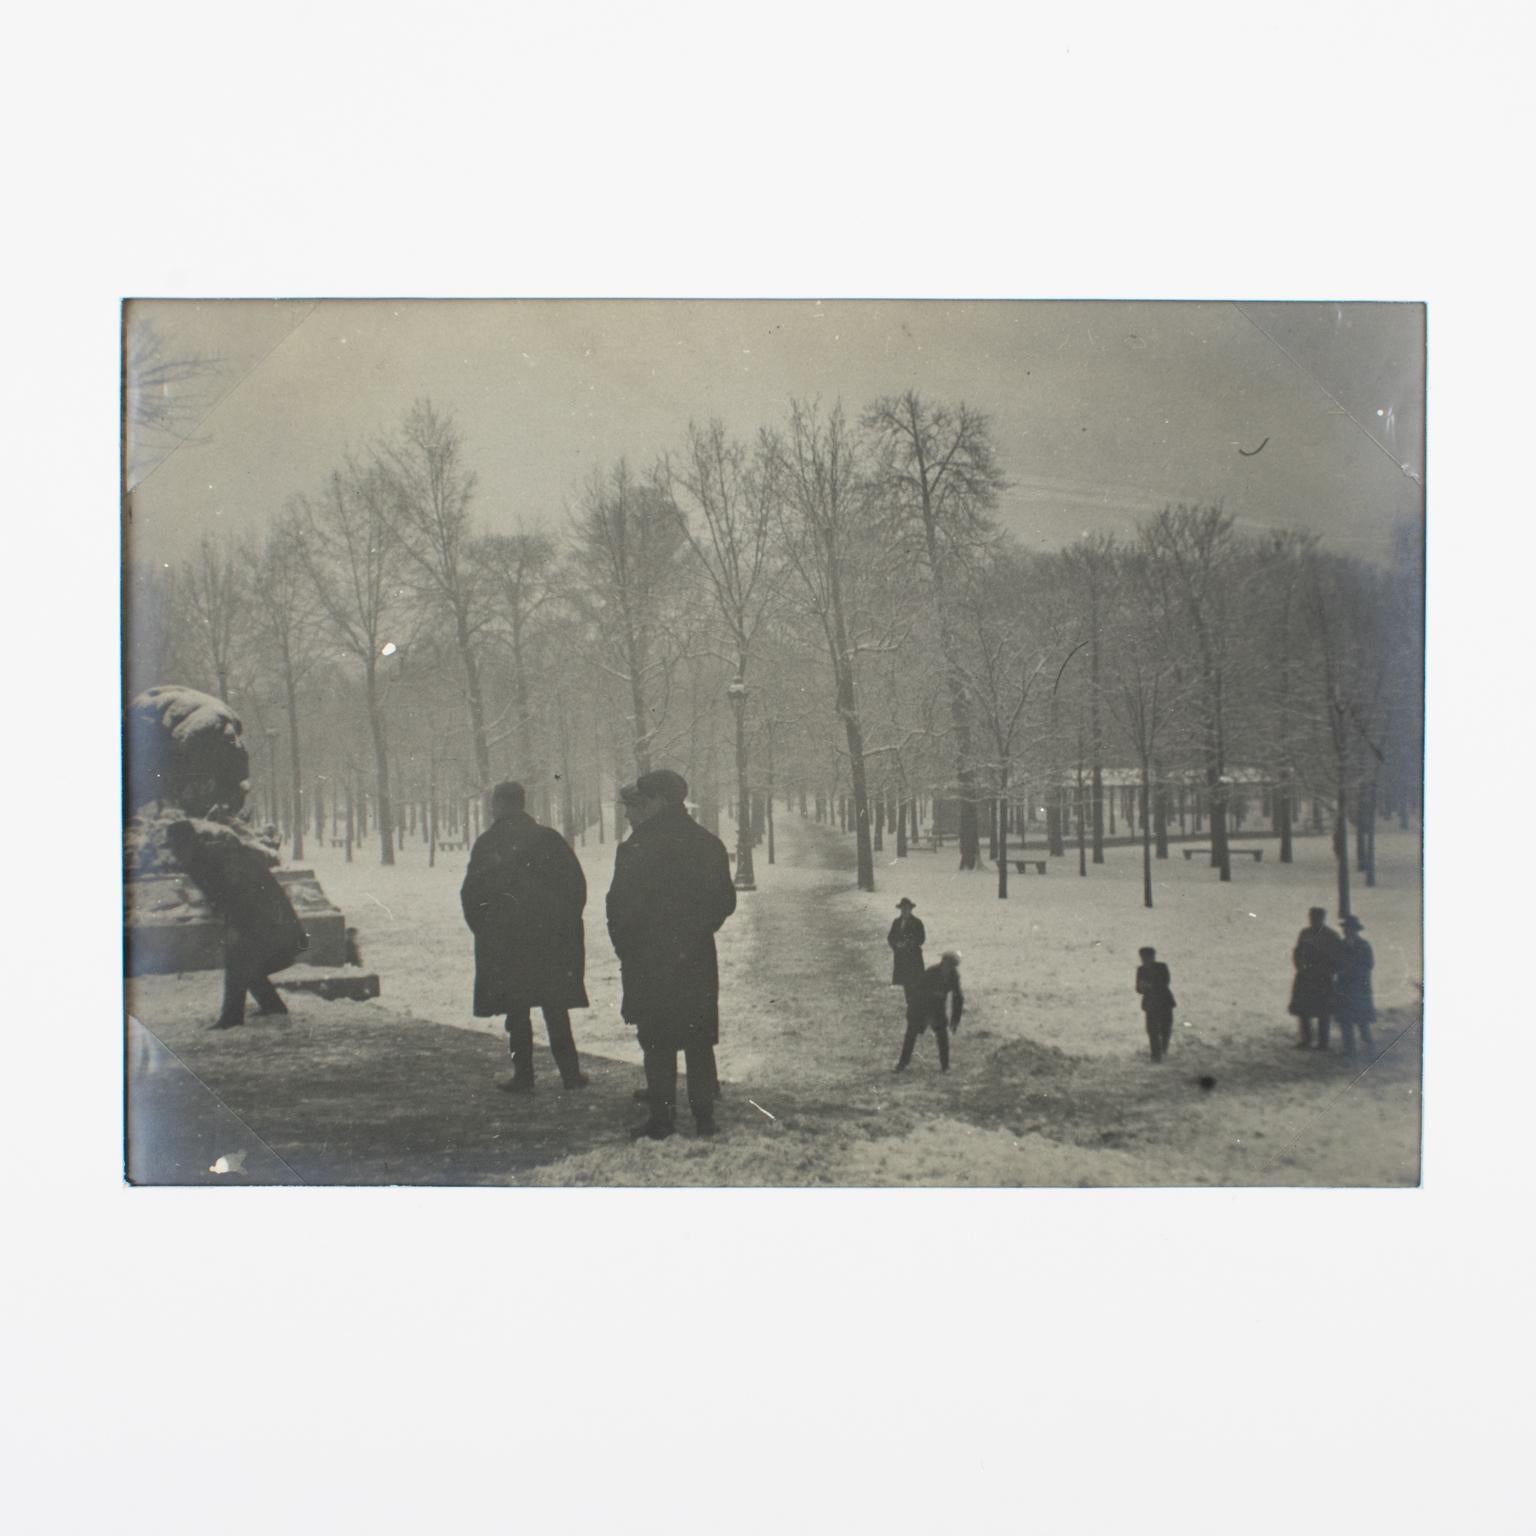 A unique original silver gelatin black and white photography. The Tuileries Garden in Paris under the snow, France, 26th of January 1926. 
The Parisians braved the cold at the end of January 1926 to go to the Tuileries garden covered by a thick